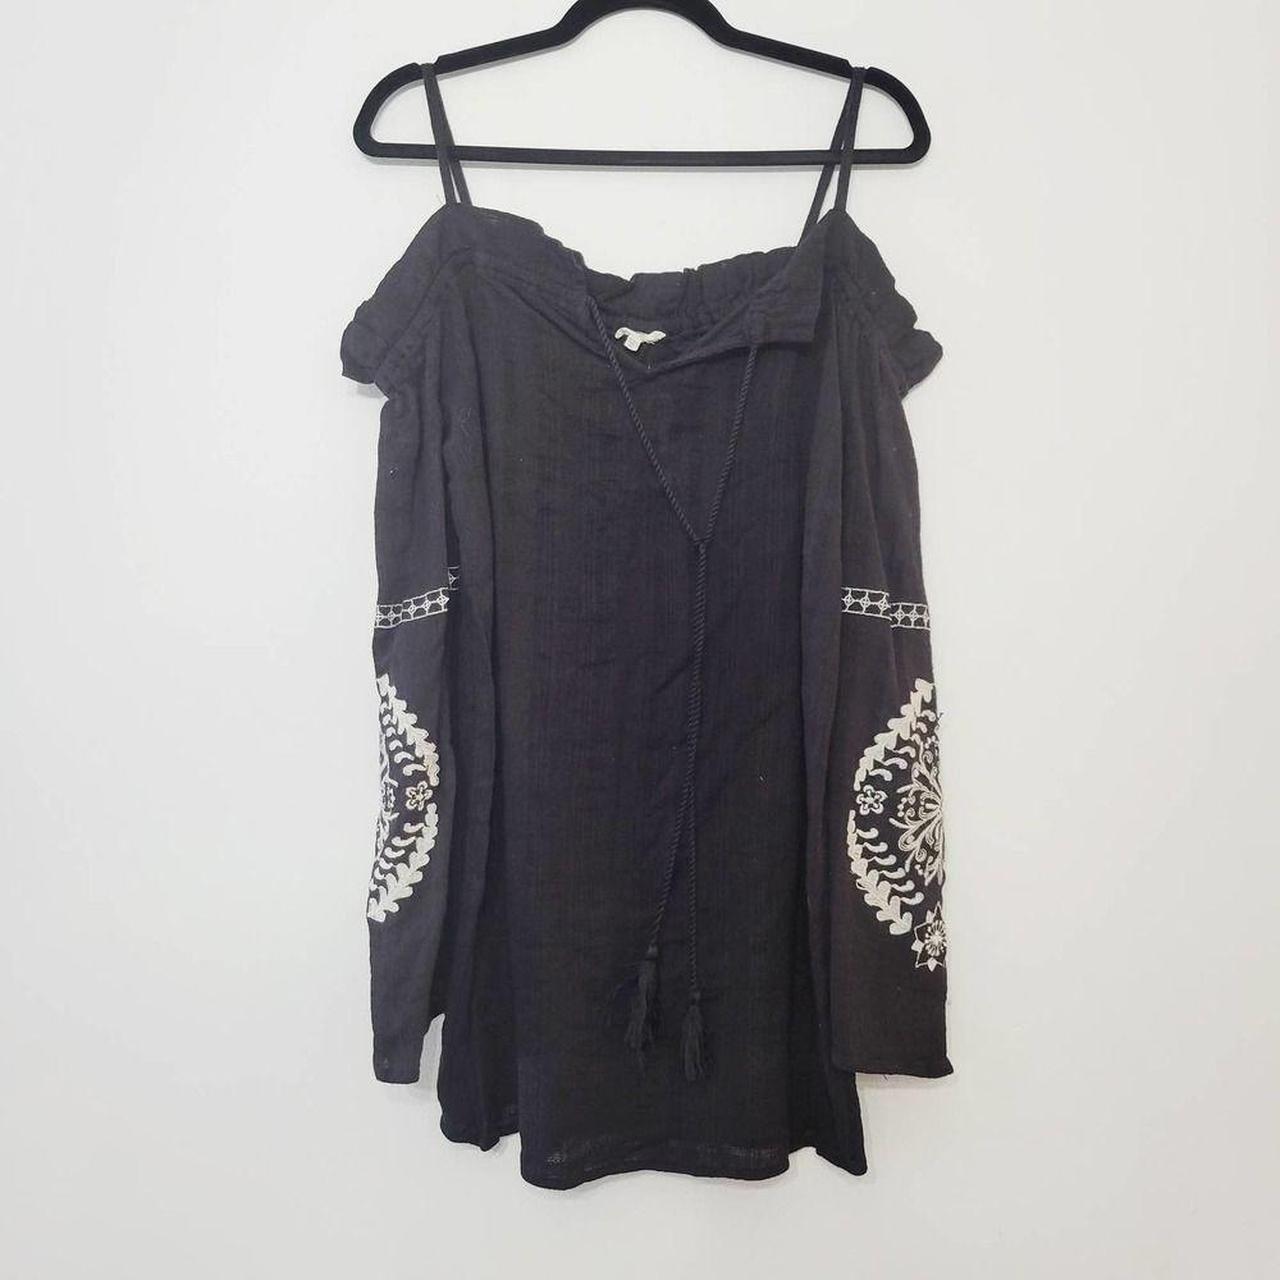 Product Image 2 - Wet Seal Womens Black/White Embroidered